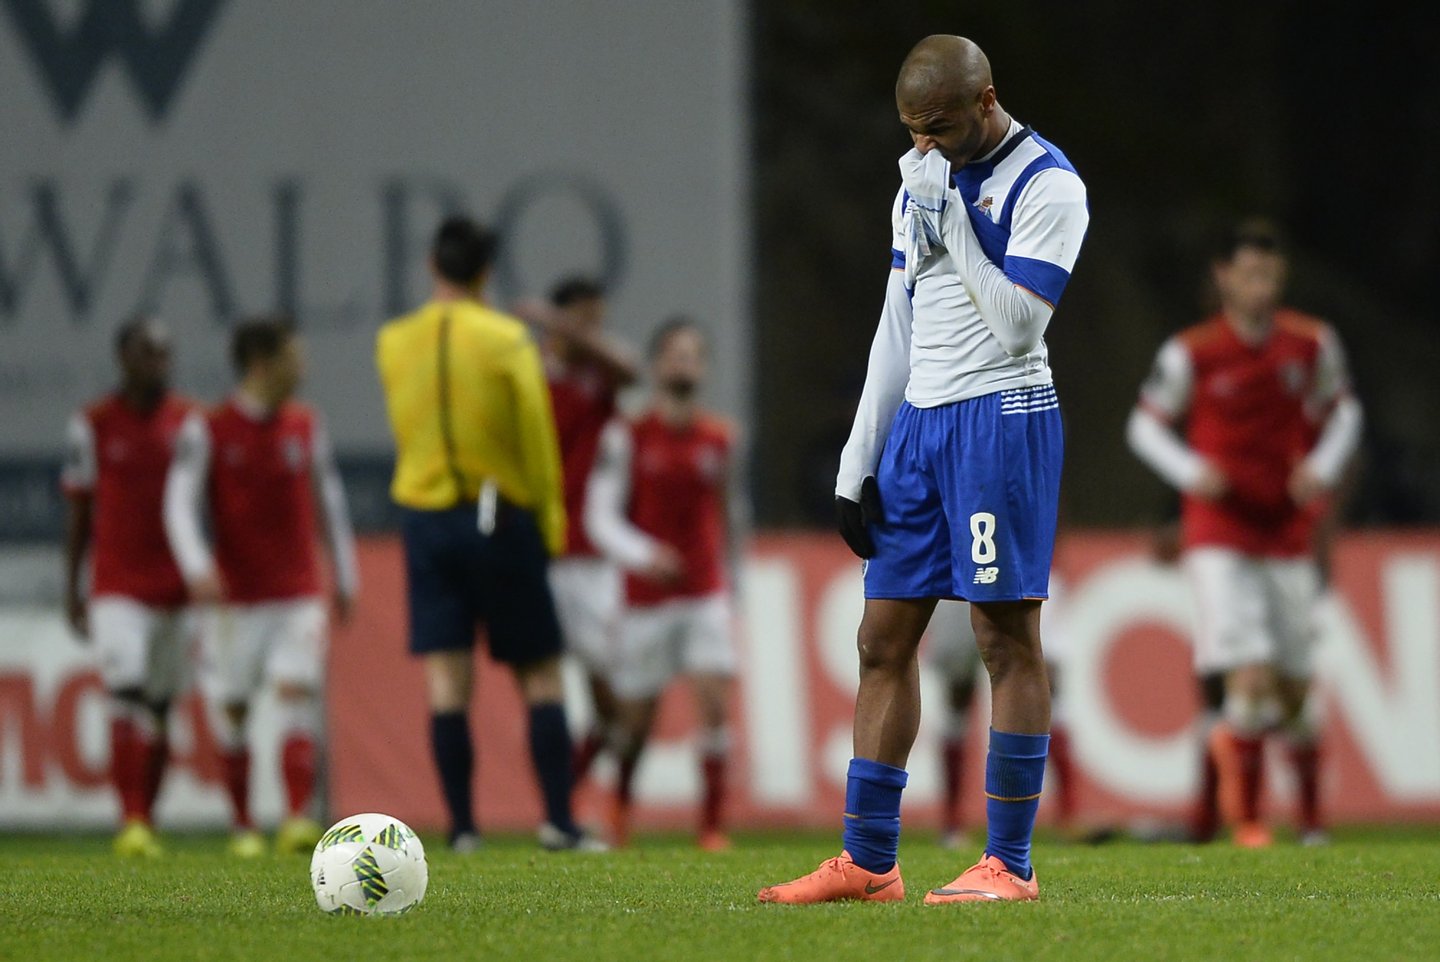 Porto's Algerian midfielder Yacine Brahimi reacts after the third goal scored by Braga during the Portuguese league football match SC Braga vs FC Porto at the AXA stadium in Braga on March 6, 2016. Braga won the match 3-1. / AFP / MIGUEL RIOPA (Photo credit should read MIGUEL RIOPA/AFP/Getty Images)